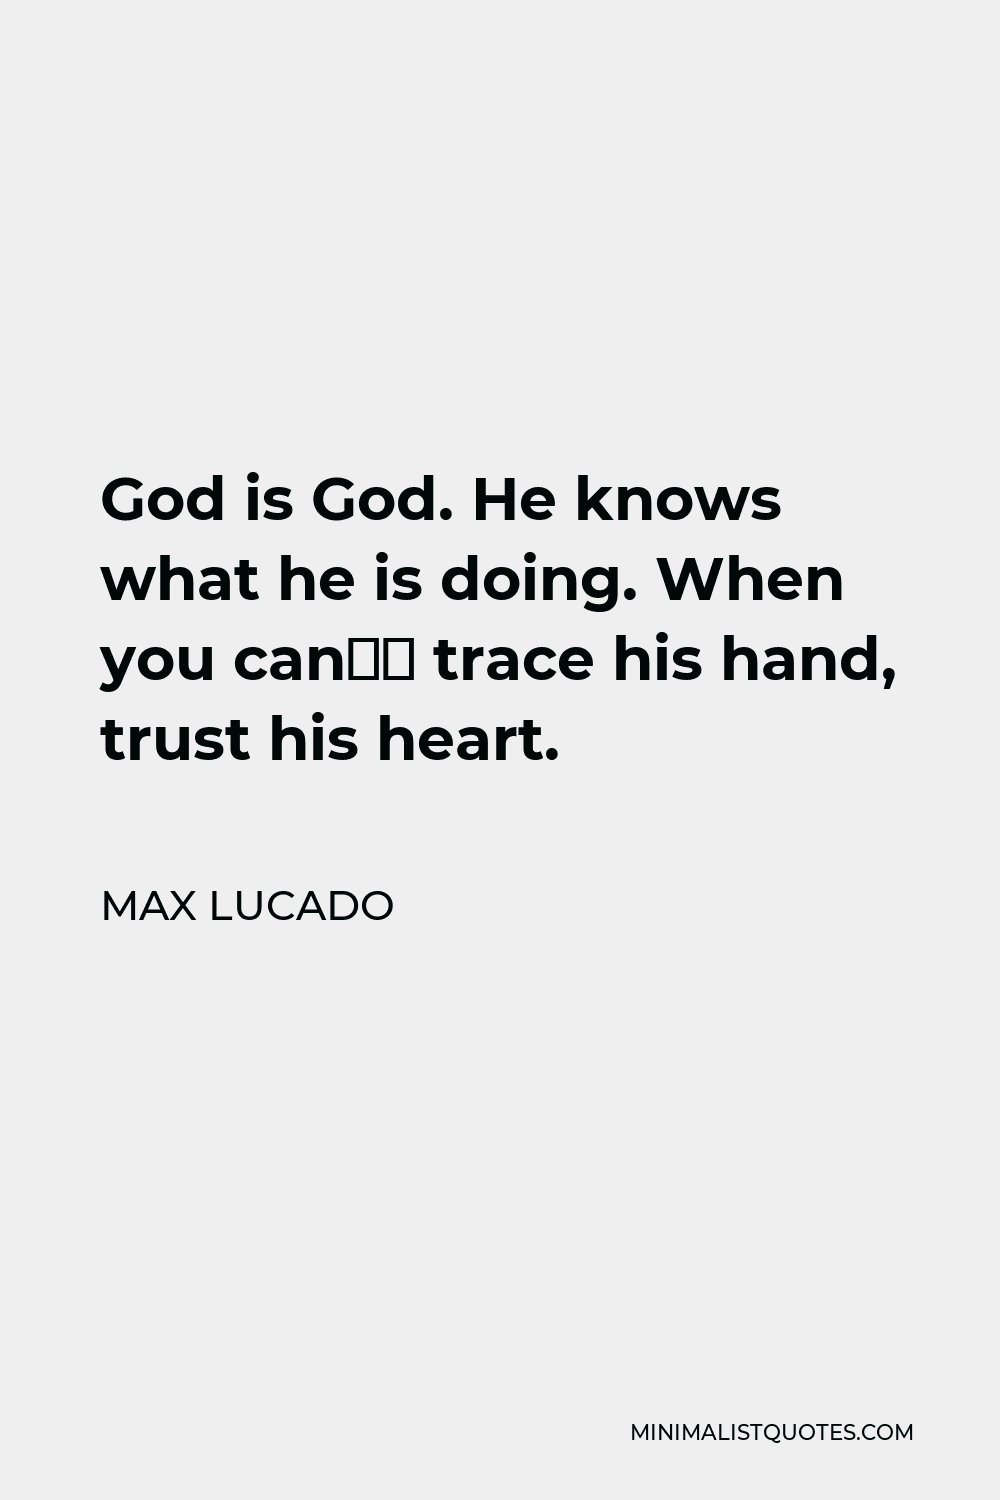 Max Lucado Quote - God is God. He knows what he is doing. When you can’t trace his hand, trust his heart.